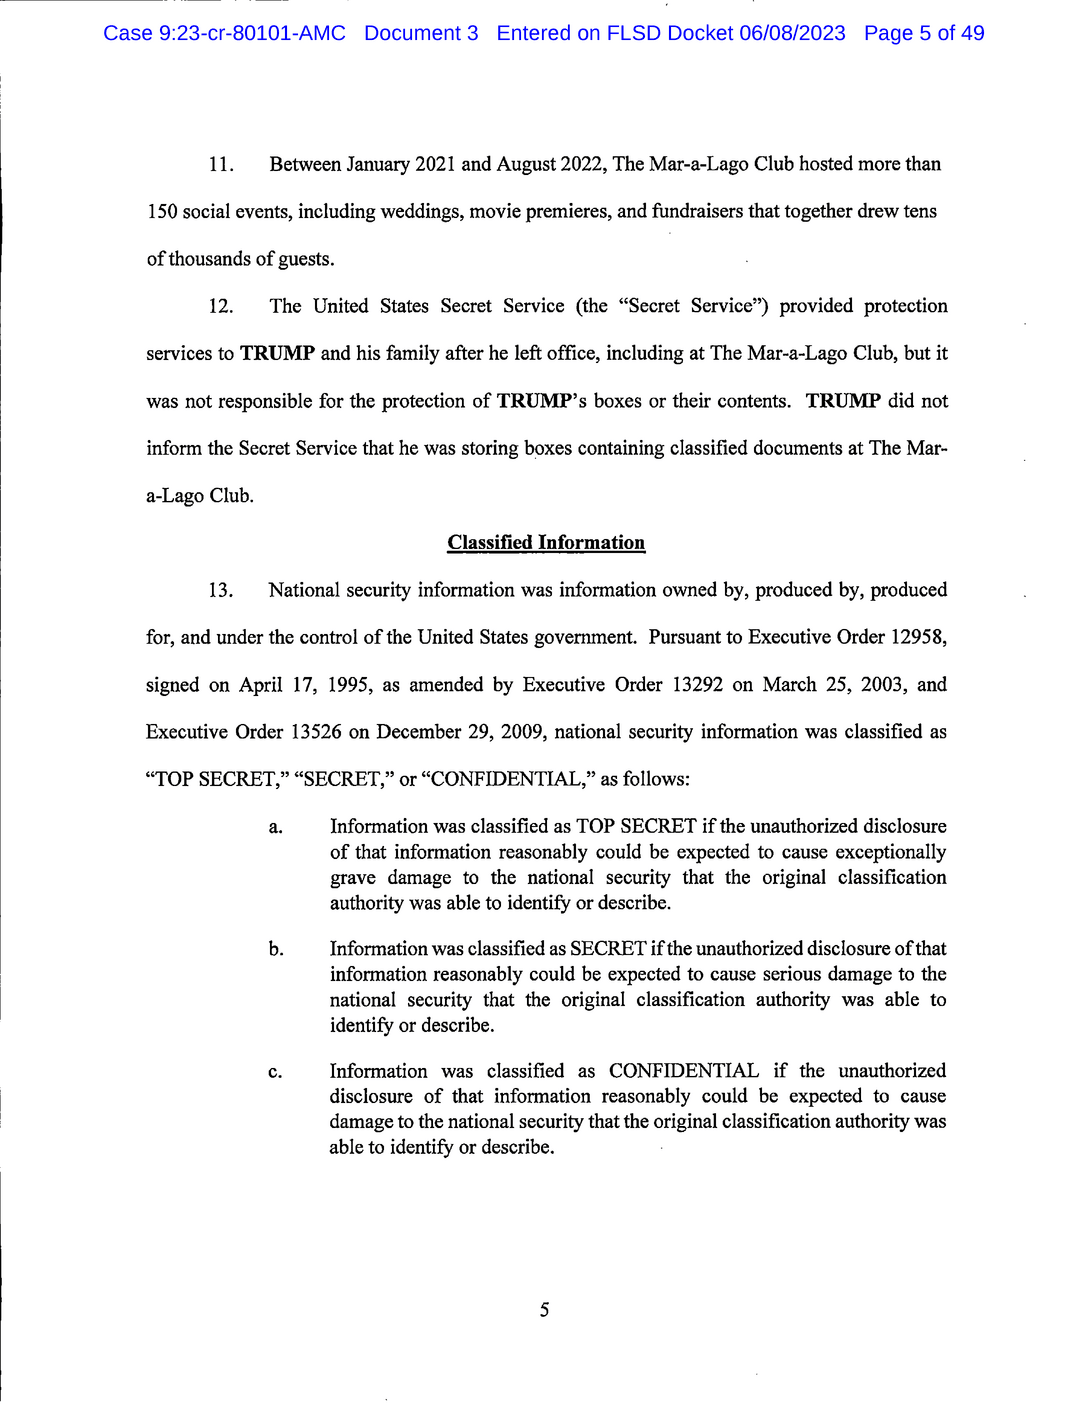 Page 5 of Donald Trump Classified Documents Indictment PDF document.